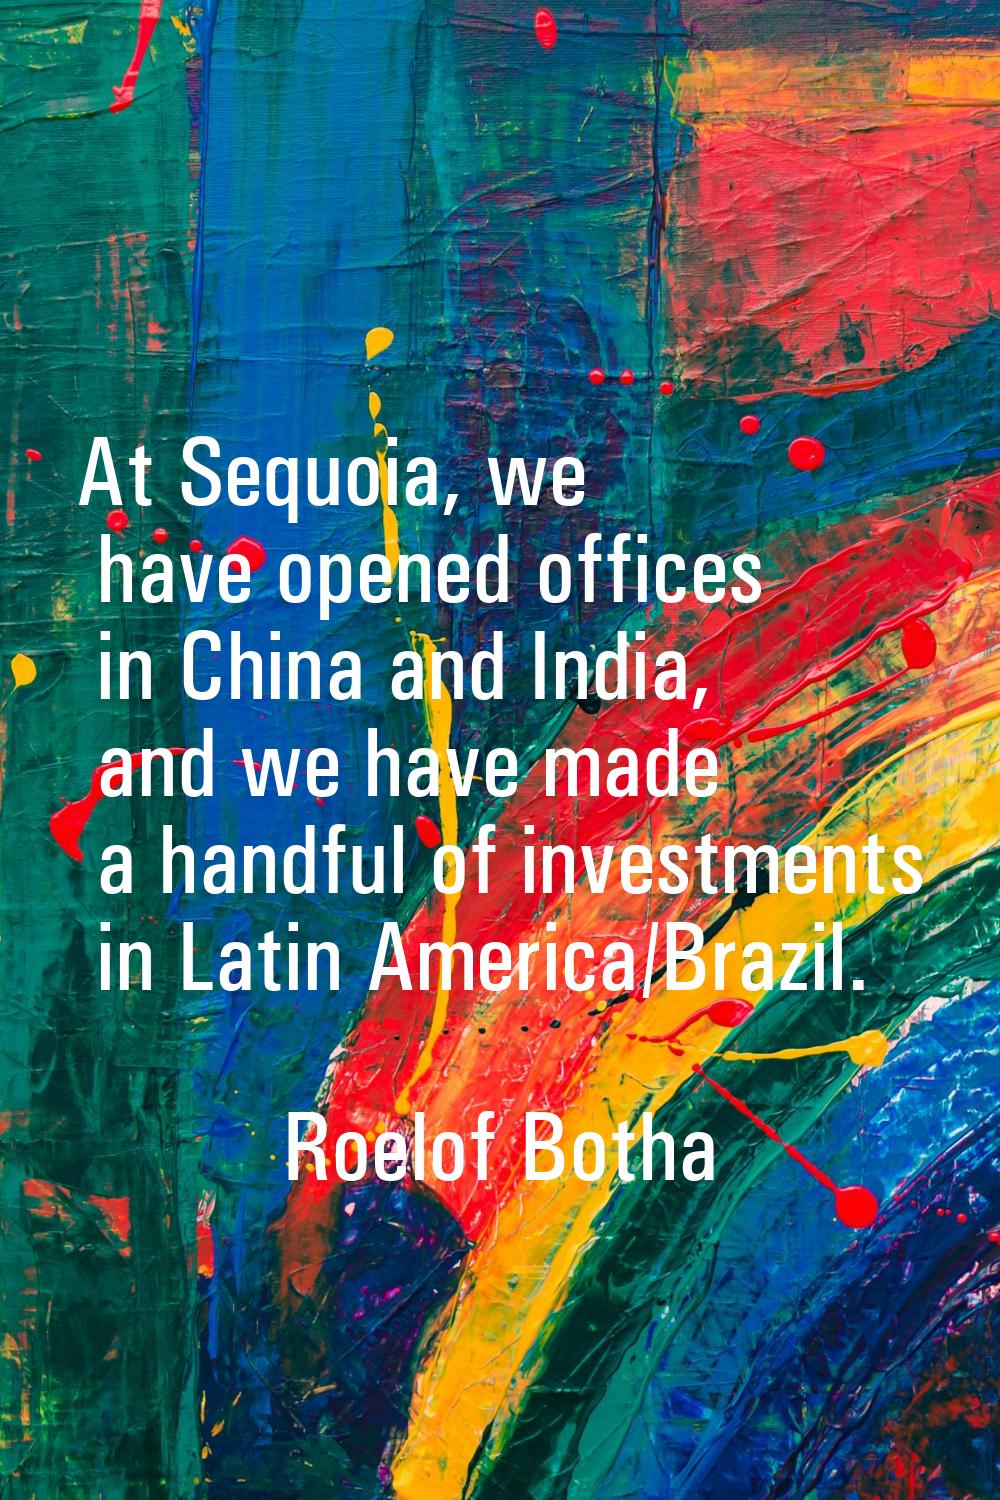 At Sequoia, we have opened offices in China and India, and we have made a handful of investments in